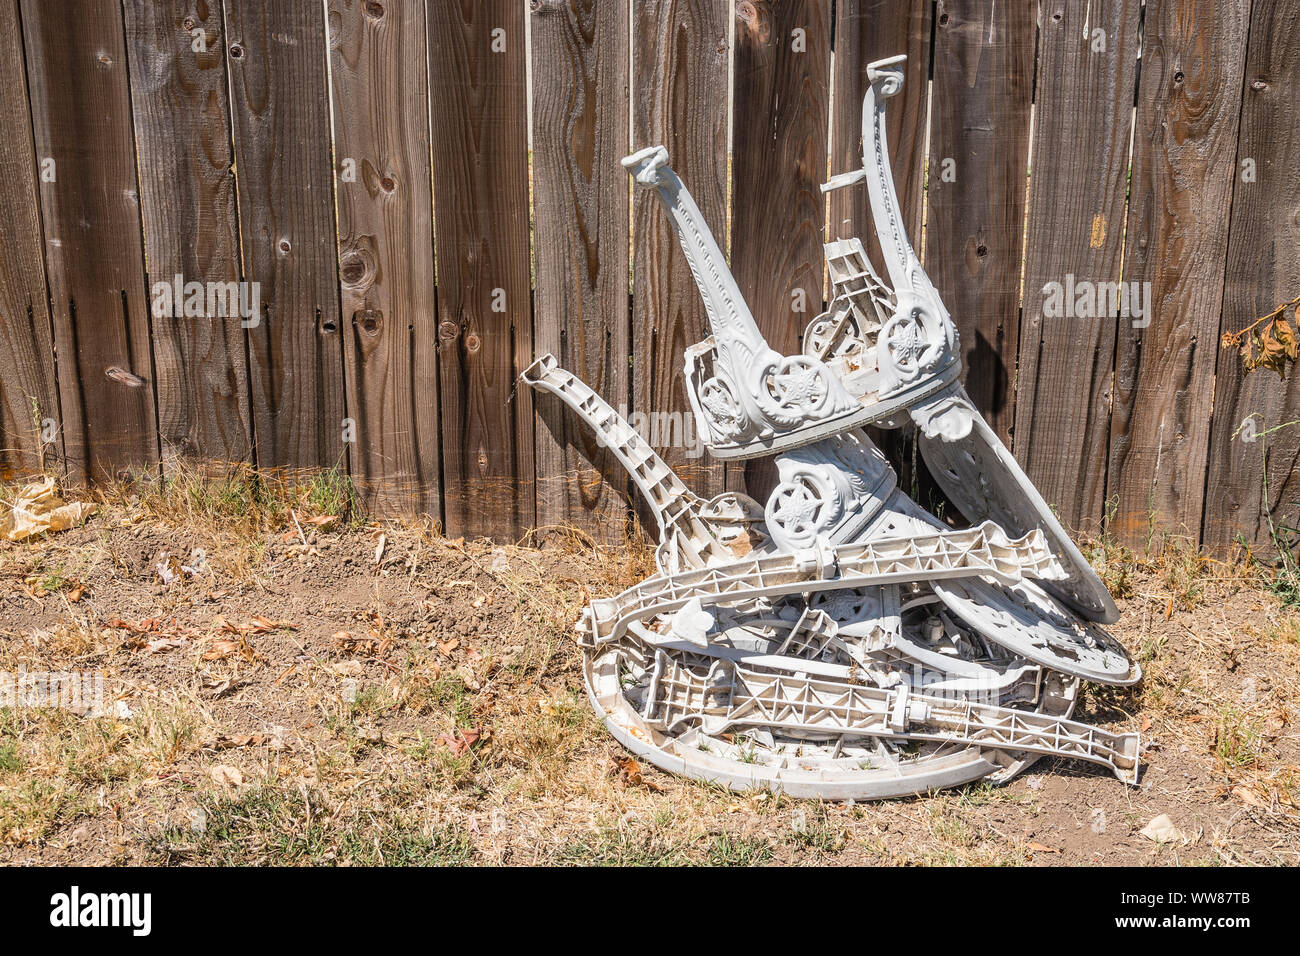 Two plastic lawn chairs and a matching table that have been destroyed are stacked in a pile waiting to be recycled in someone's front yard. Stock Photo